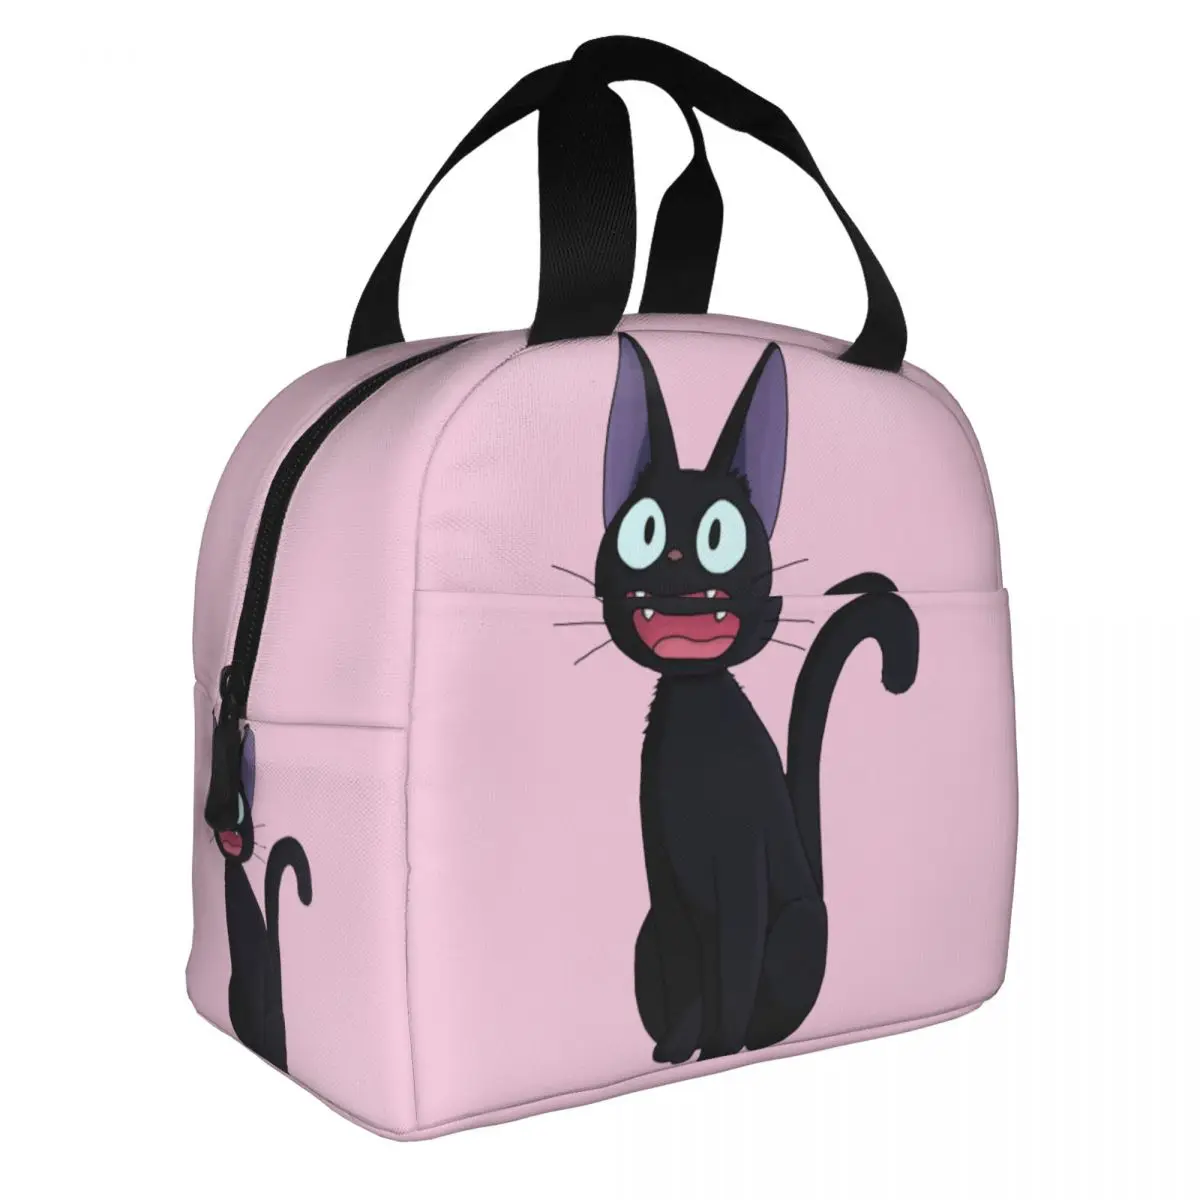 

Kiki's Delivery Service Witch Jiji Cat Kawaii Insulated Lunch Bags Cooler Bag Lunch Container Tote Lunch Box Food Storage Bags